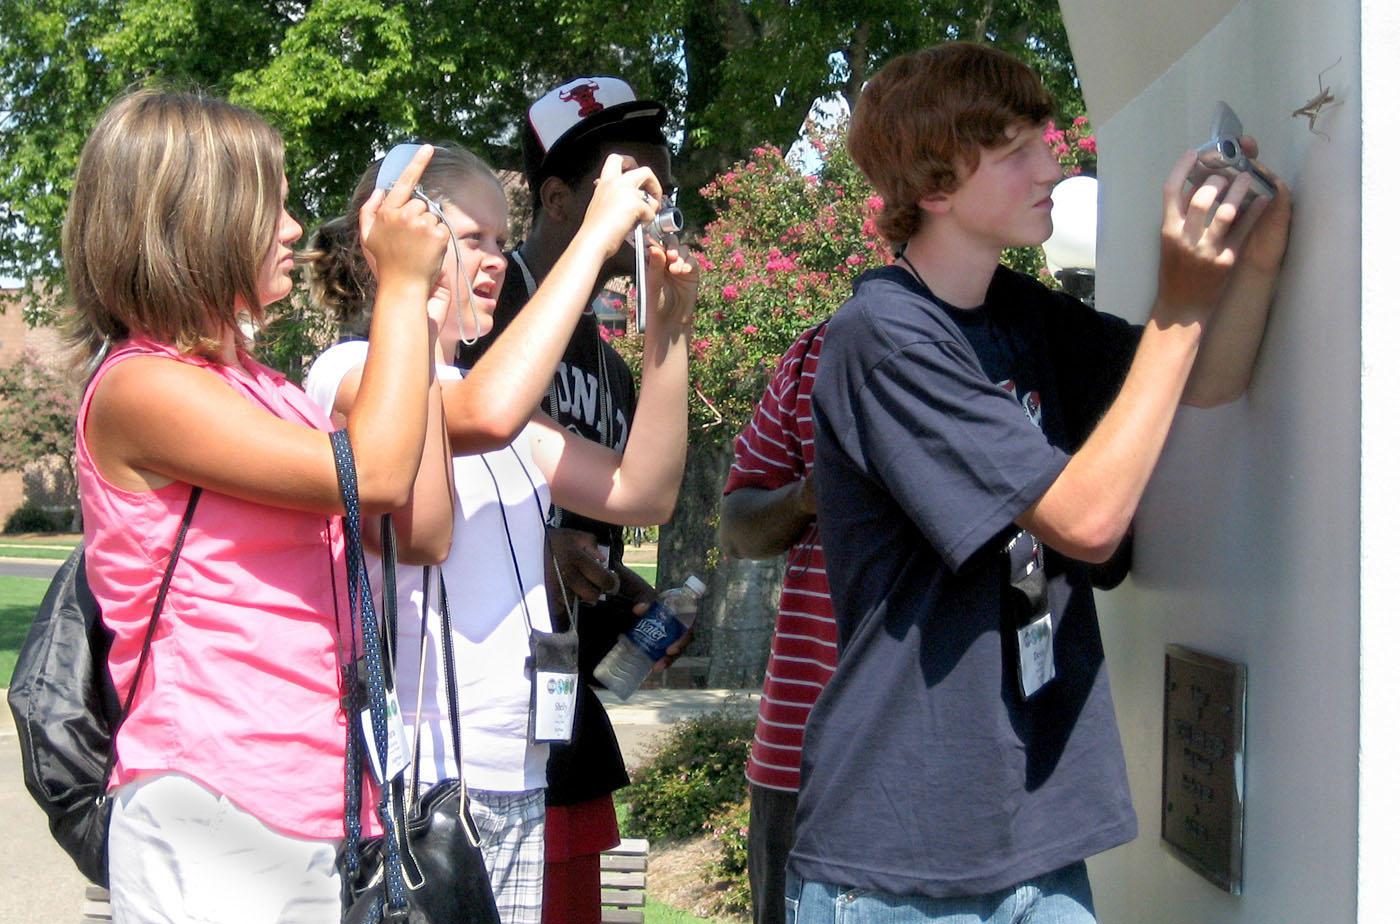 4-H Technology Conference participants, from left, Tara Roberts and Shelly Guy, both of George County, and Devin Doole of Marshall County focus their cameras on a praying mantis during a photo safari. They were taking part in the digital photography track during the three-day camp held at Mississippi State University. (Photo by Jim Lytle/Mississippi State University Ag Communications)